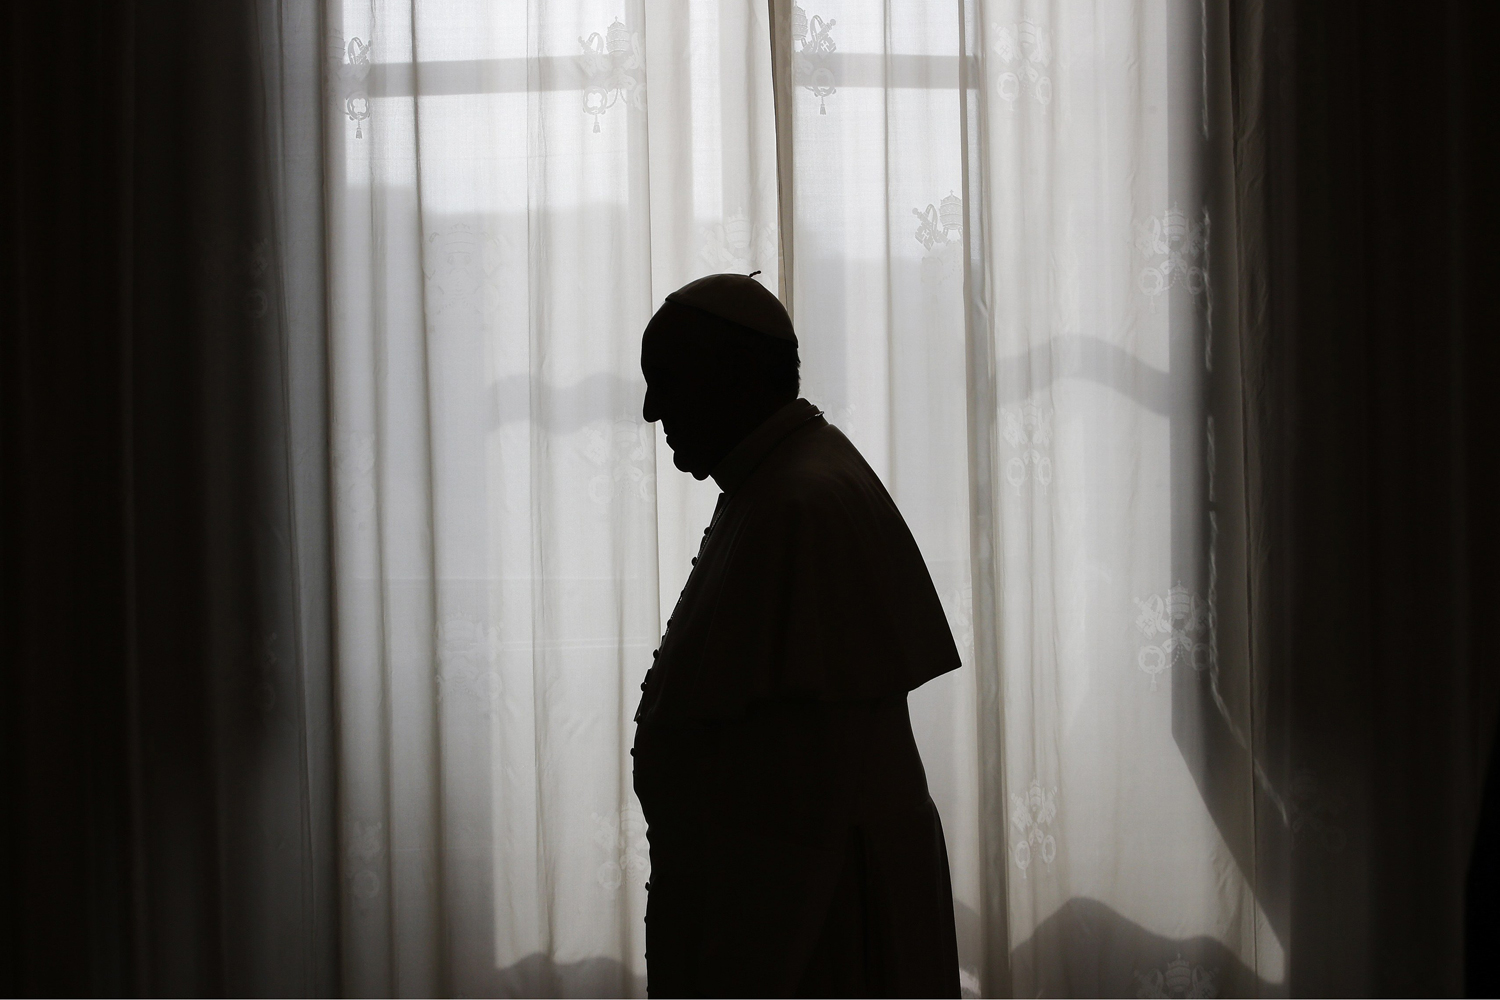 Oct. 25, 2013. Pope Francis is silhouetted against window light at the end of a meeting with Equatorial Guinea's President Teodoro Obiang Nguema Mbasogo at the Vatican.